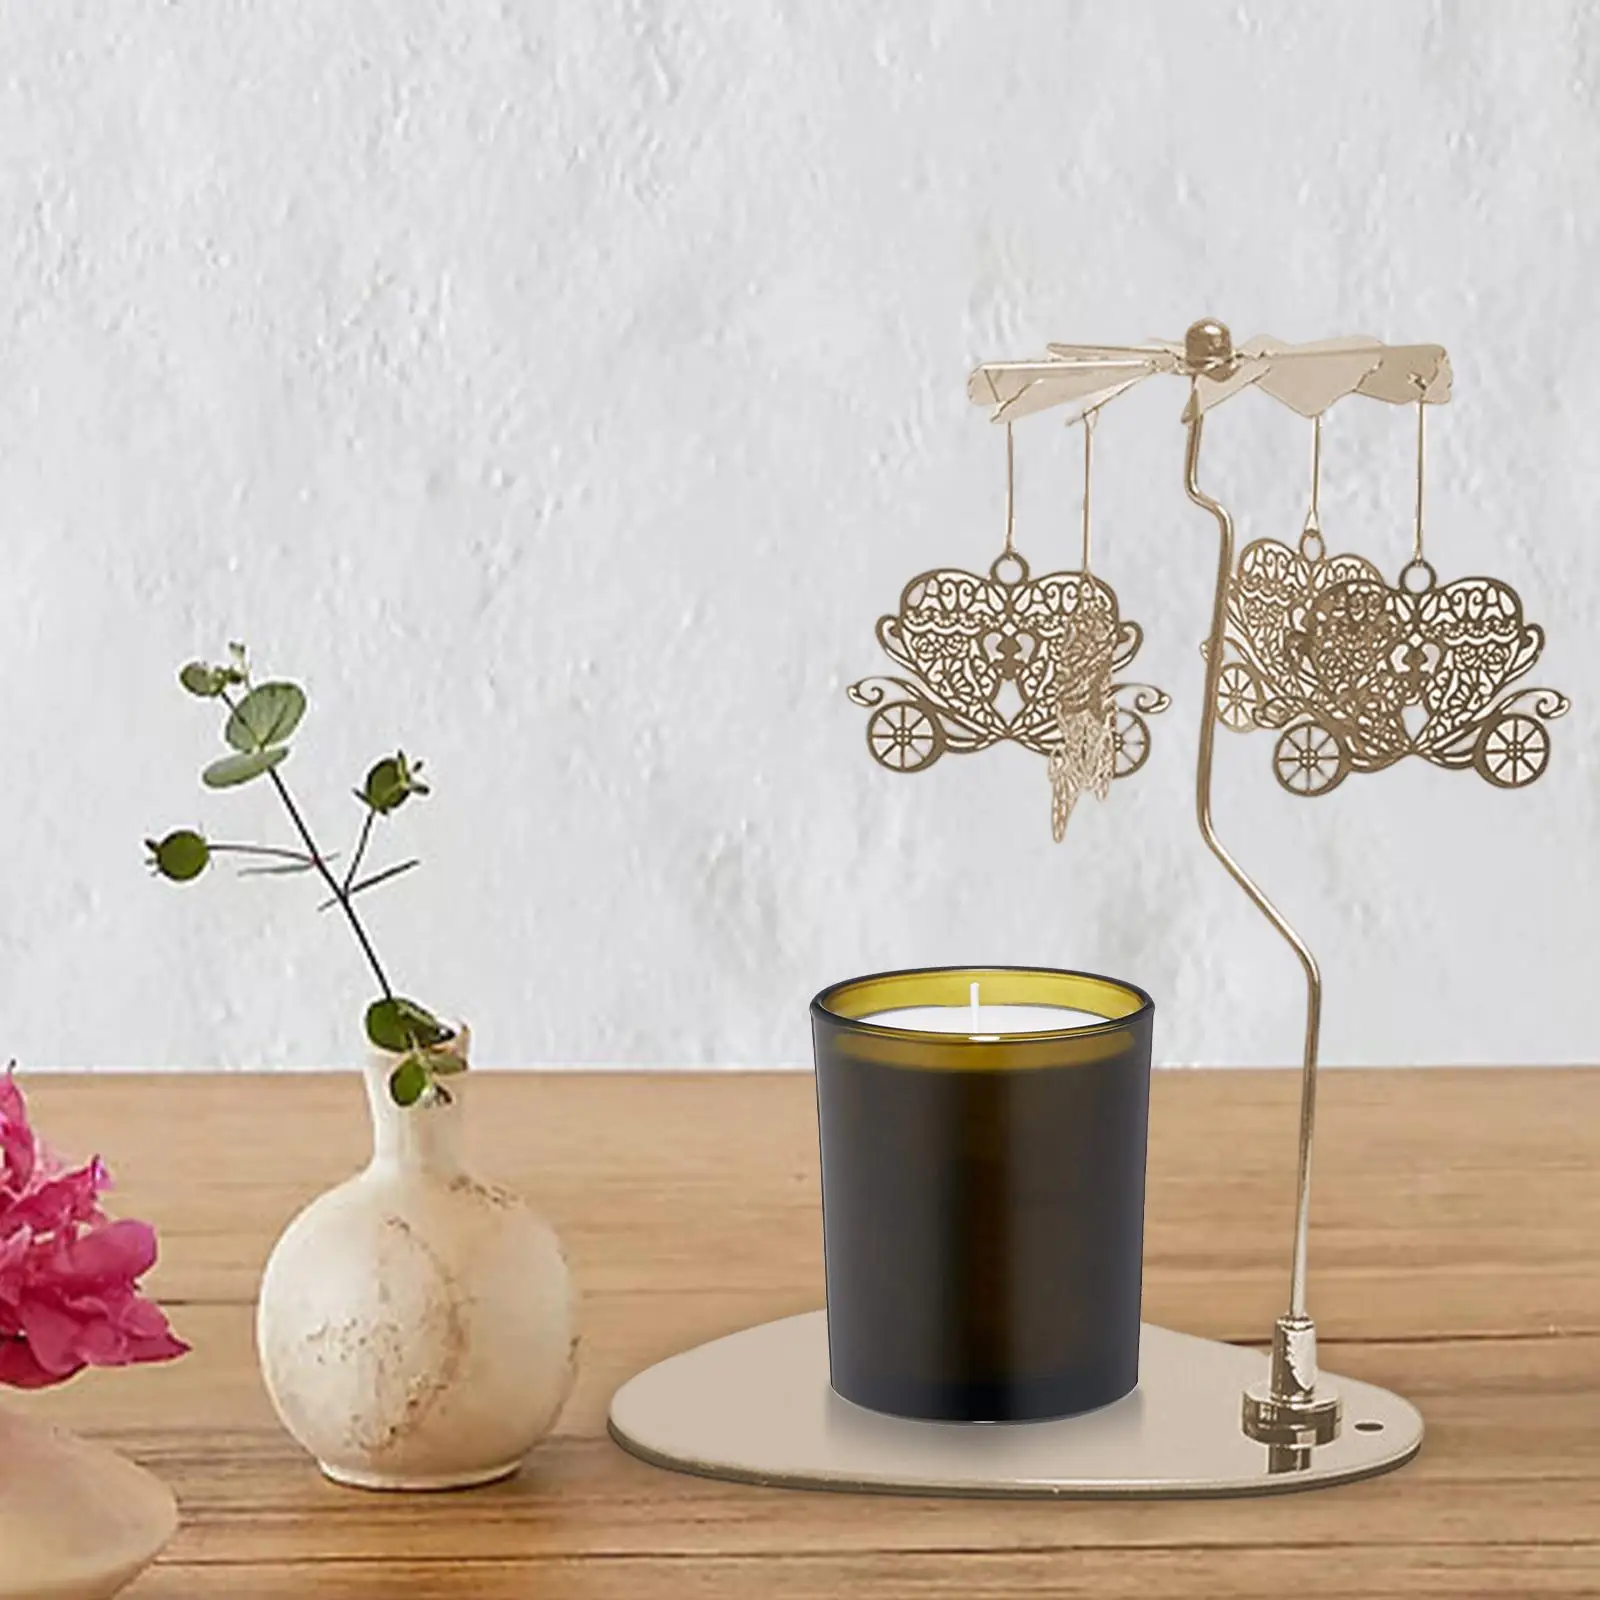 Rotary Candle Holder Tray Revolving Candlestick Table Centerpiece Tea Lights Candleholder Romantic Ornament for Wedding Party